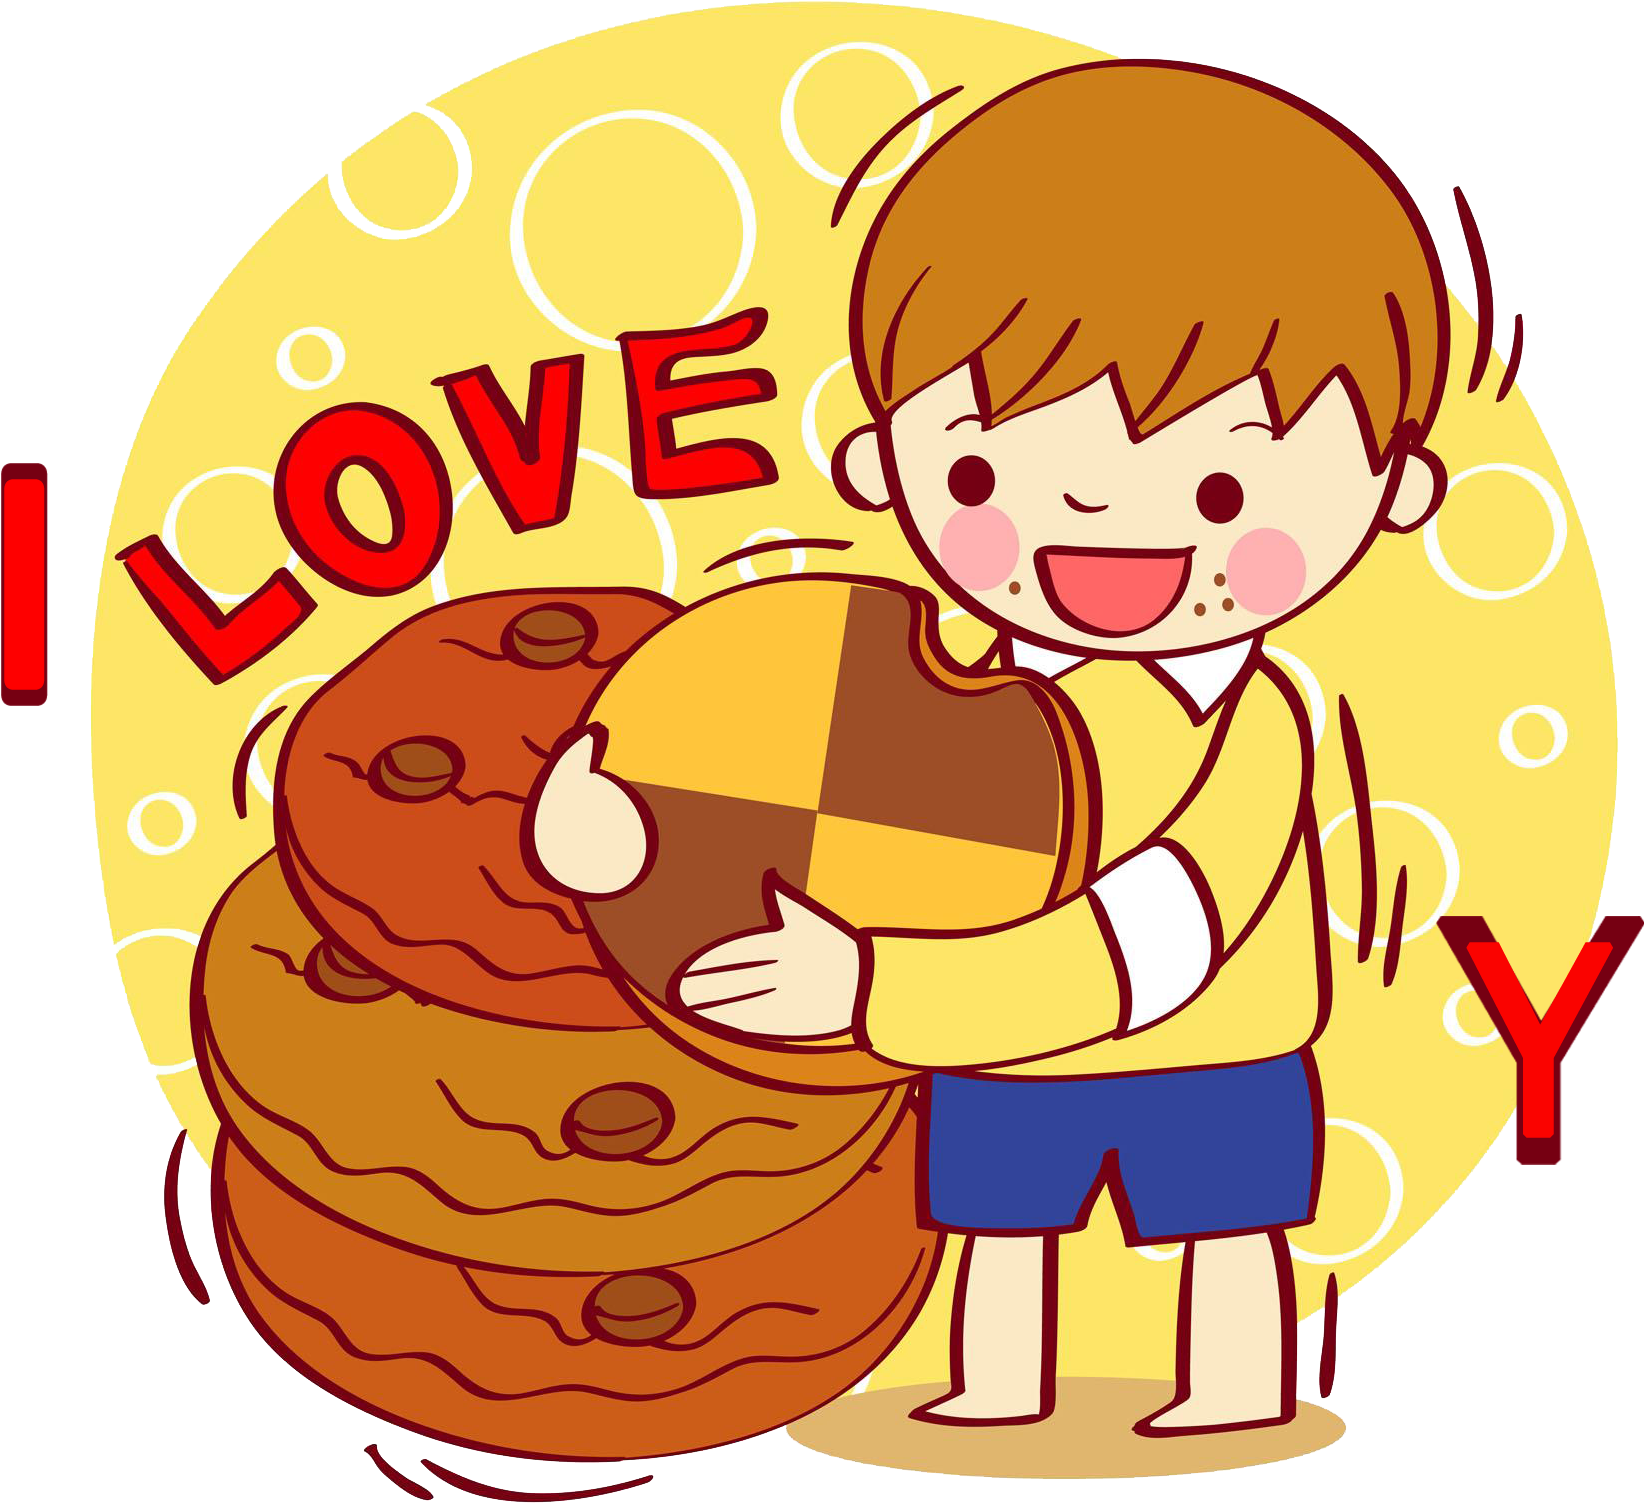 Chocolate Chip Cookie Ginger Snap Illustration - Chocolate Chip Cookie Ginger Snap Illustration (1869x1869)